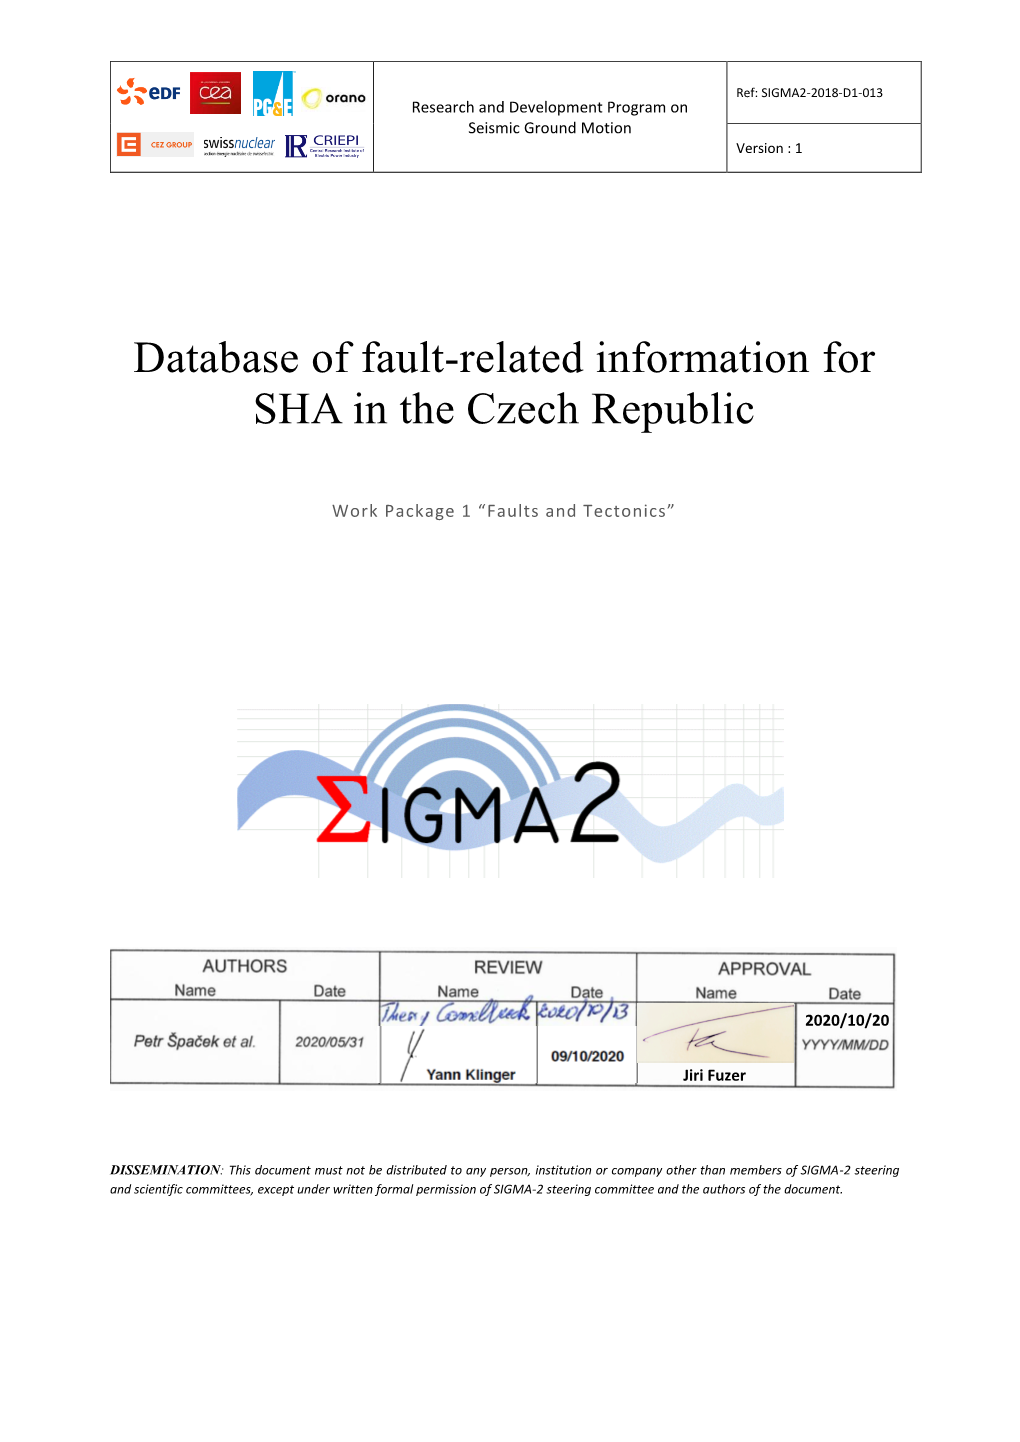 Database of Fault-Related Information for SHA in the Czech Republic